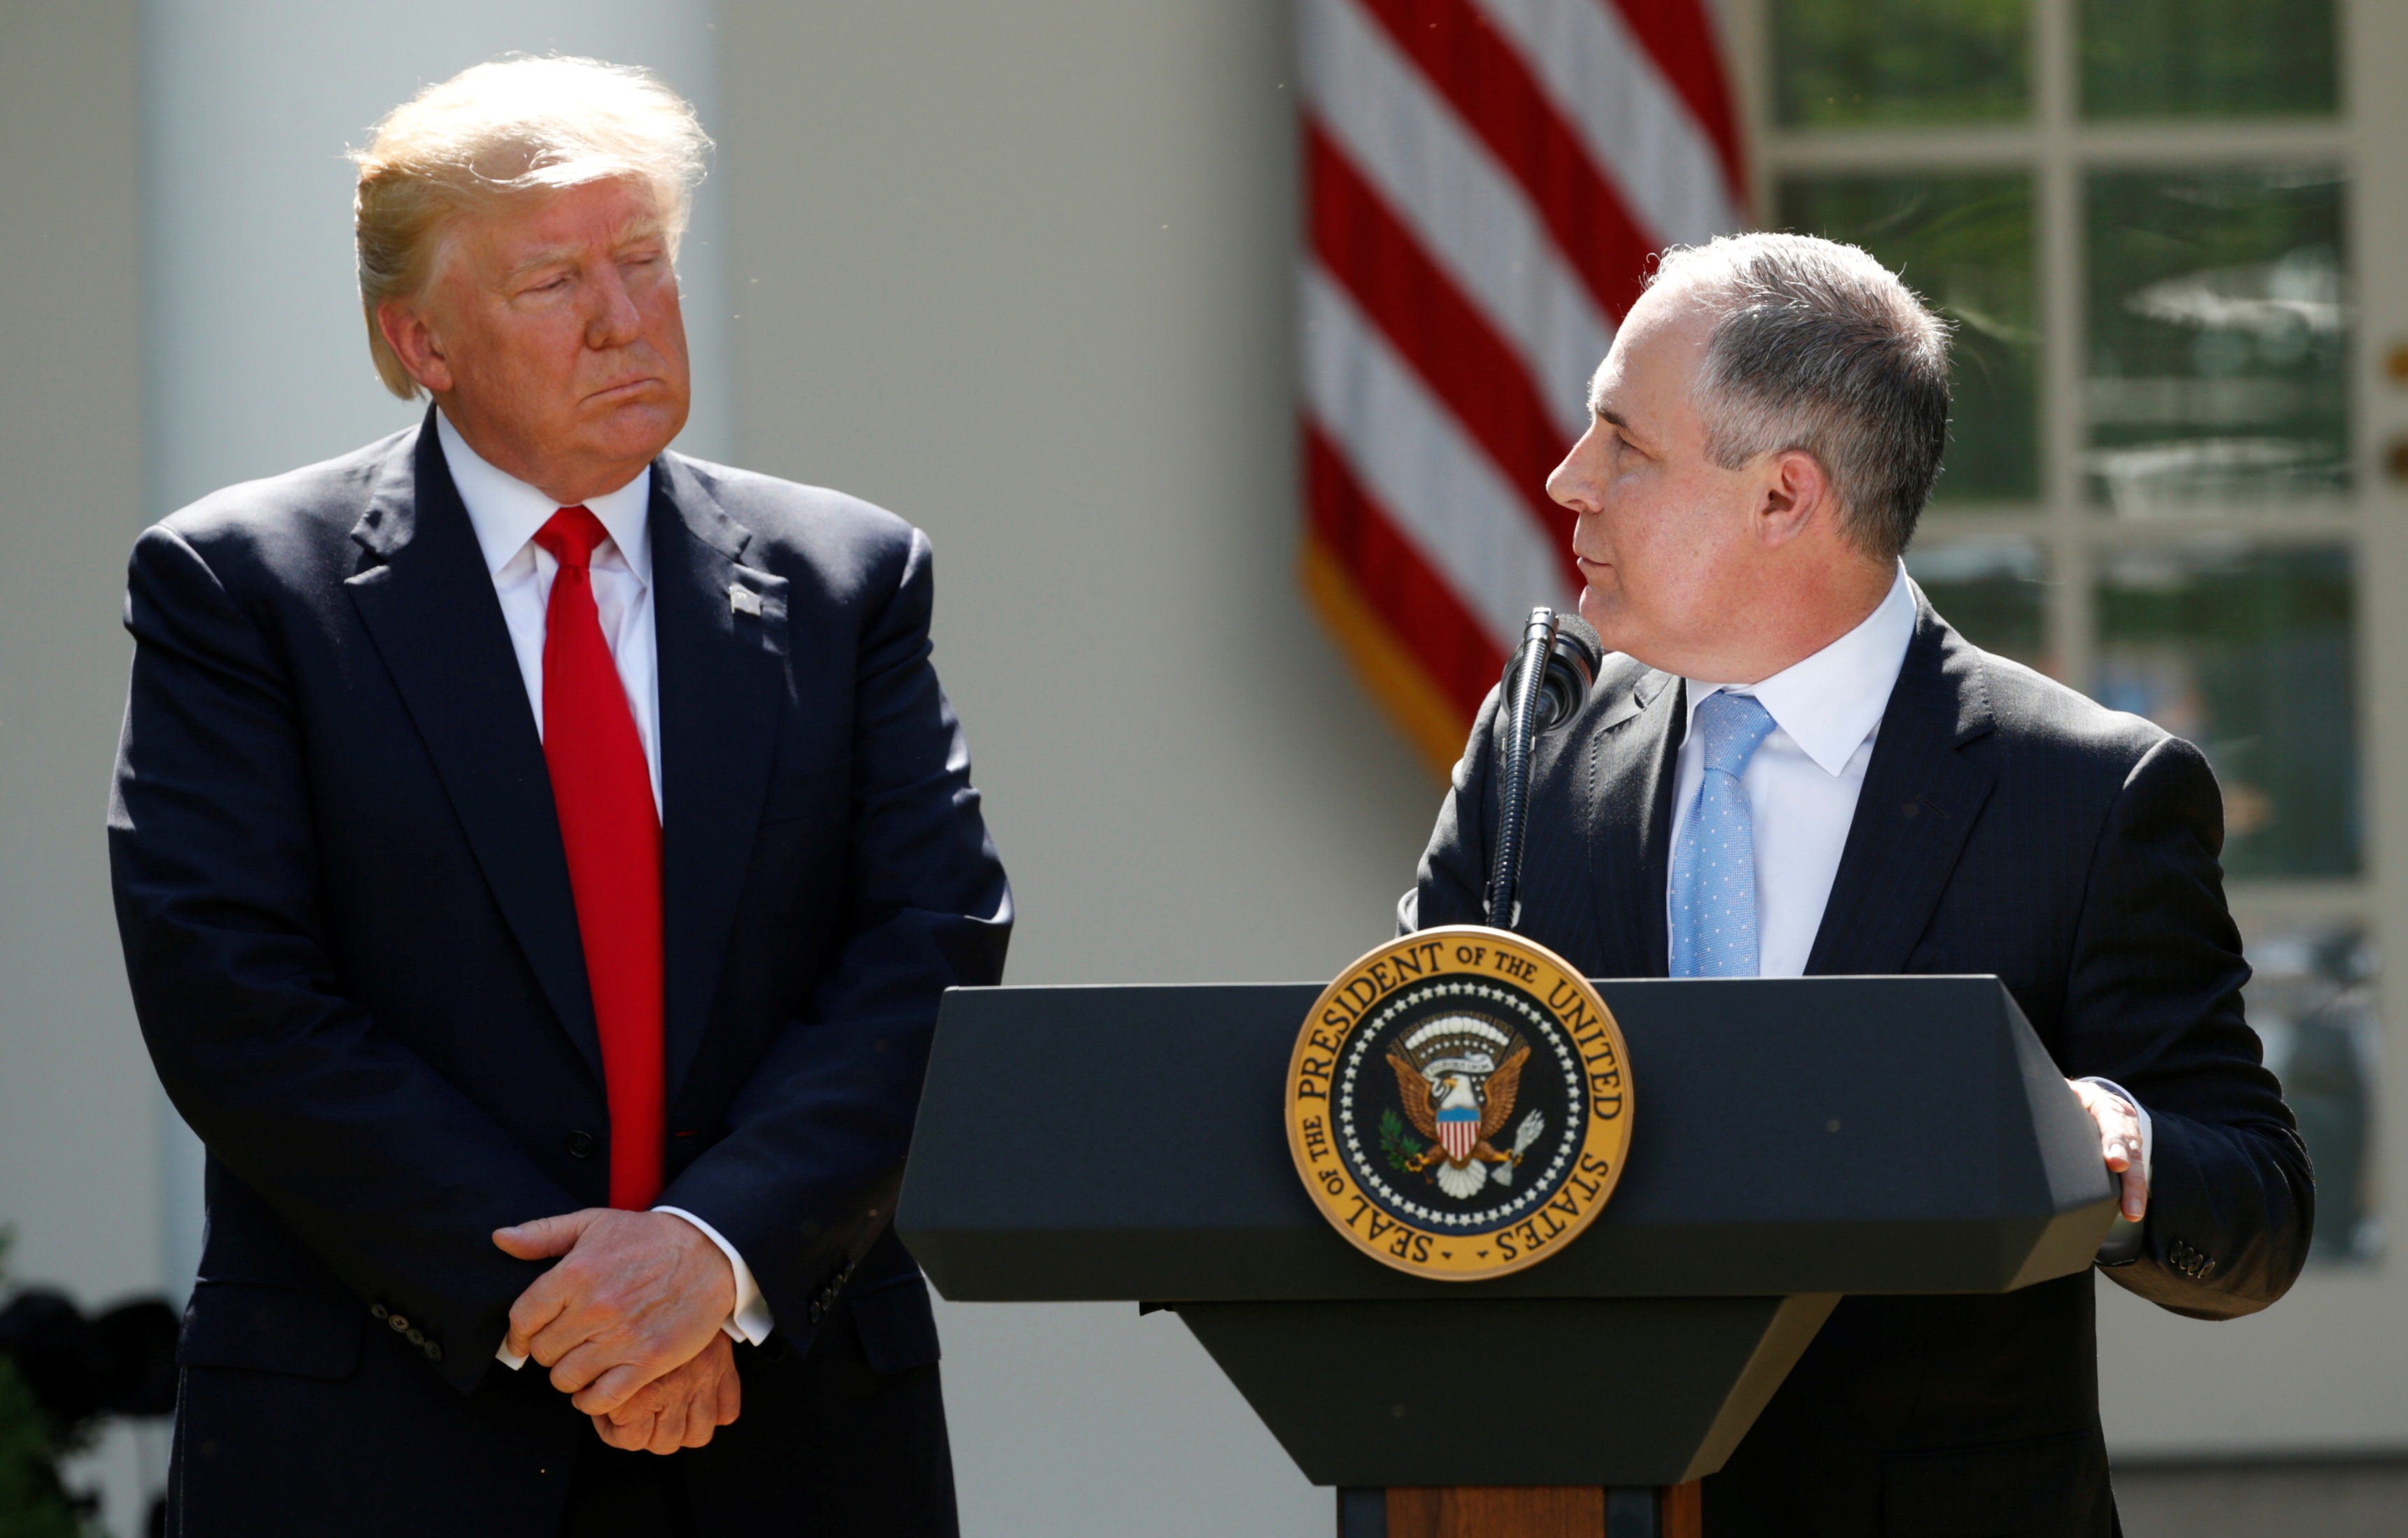 U.S. President Donald Trump (L) listens to EPA Administrator Scott Pruitt after announcing his decision that the United States will withdraw from the Paris Climate Agreement, in the Rose Garden of the White House in Washington, U.S., June 1, 2017. REUTERS/Kevin Lamarque